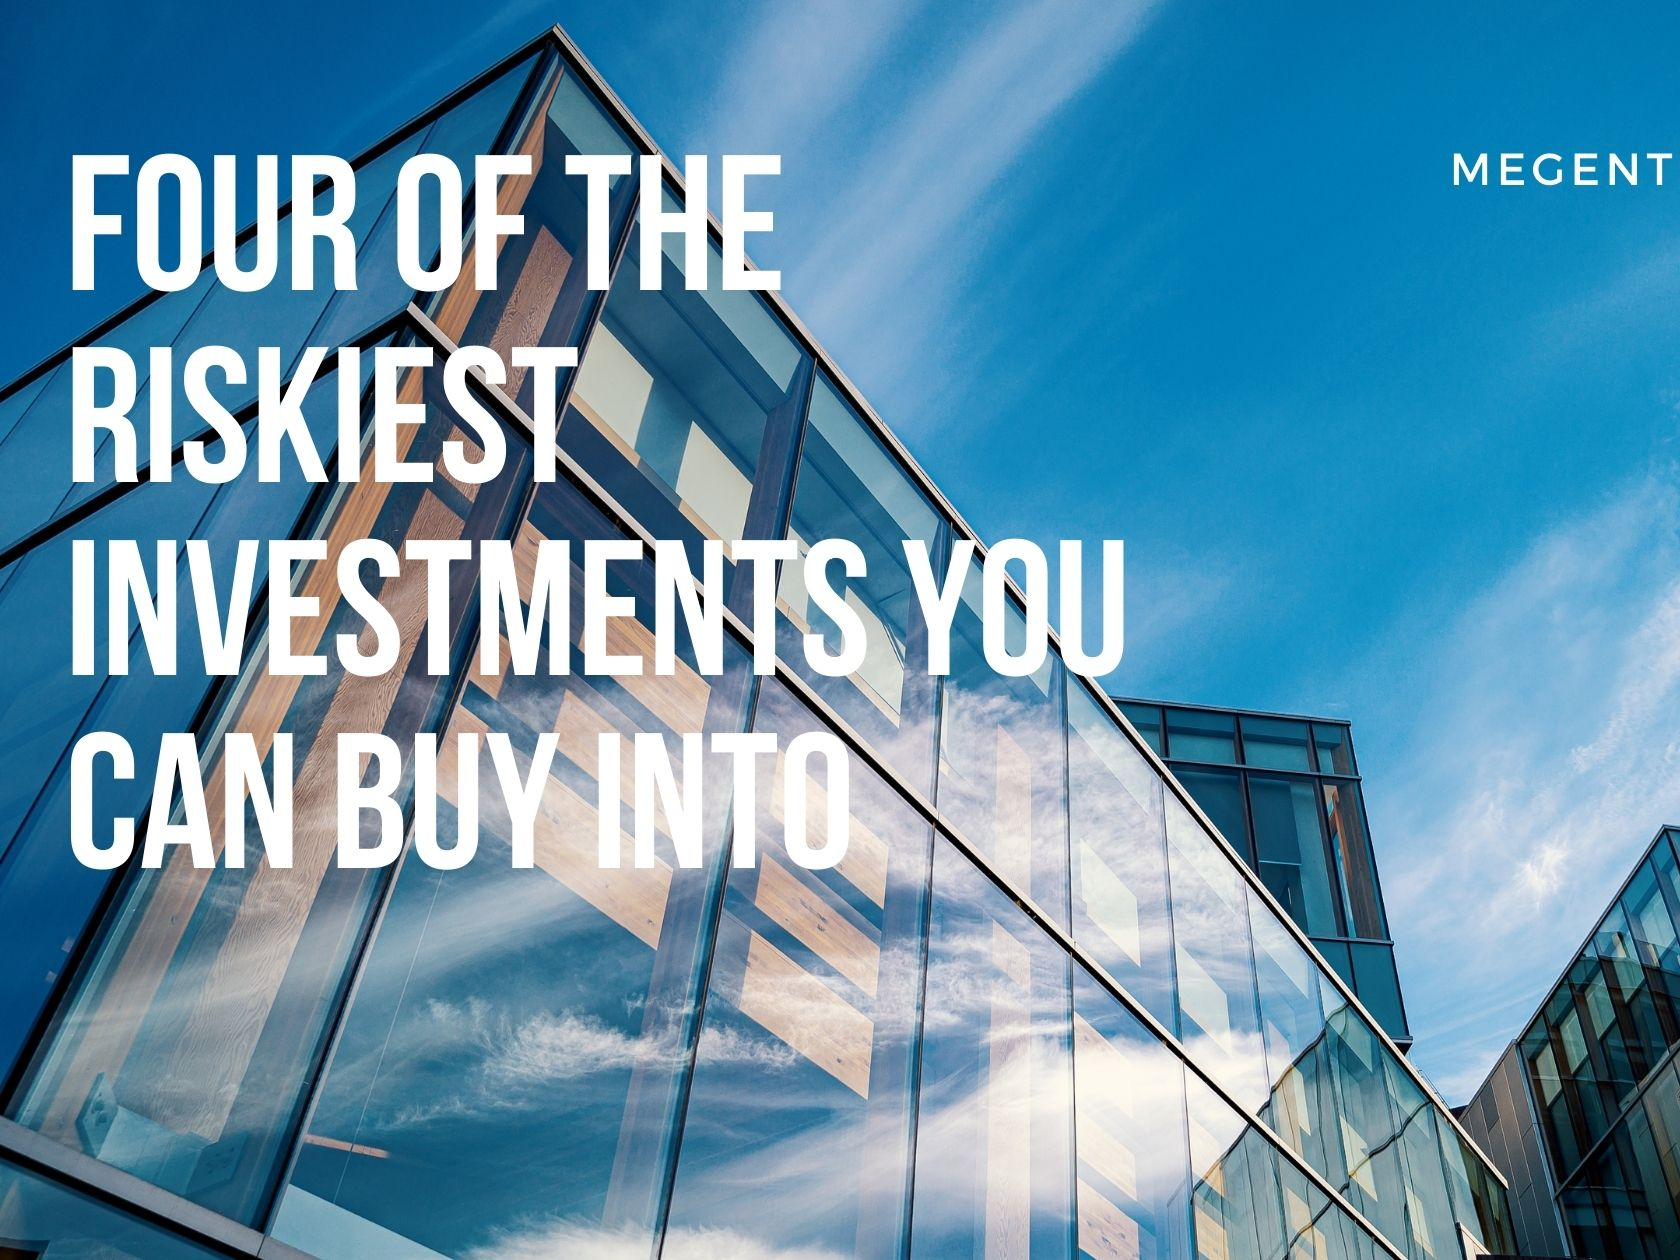 Cover of Four of the Riskiest Investments You Can Buy Into.